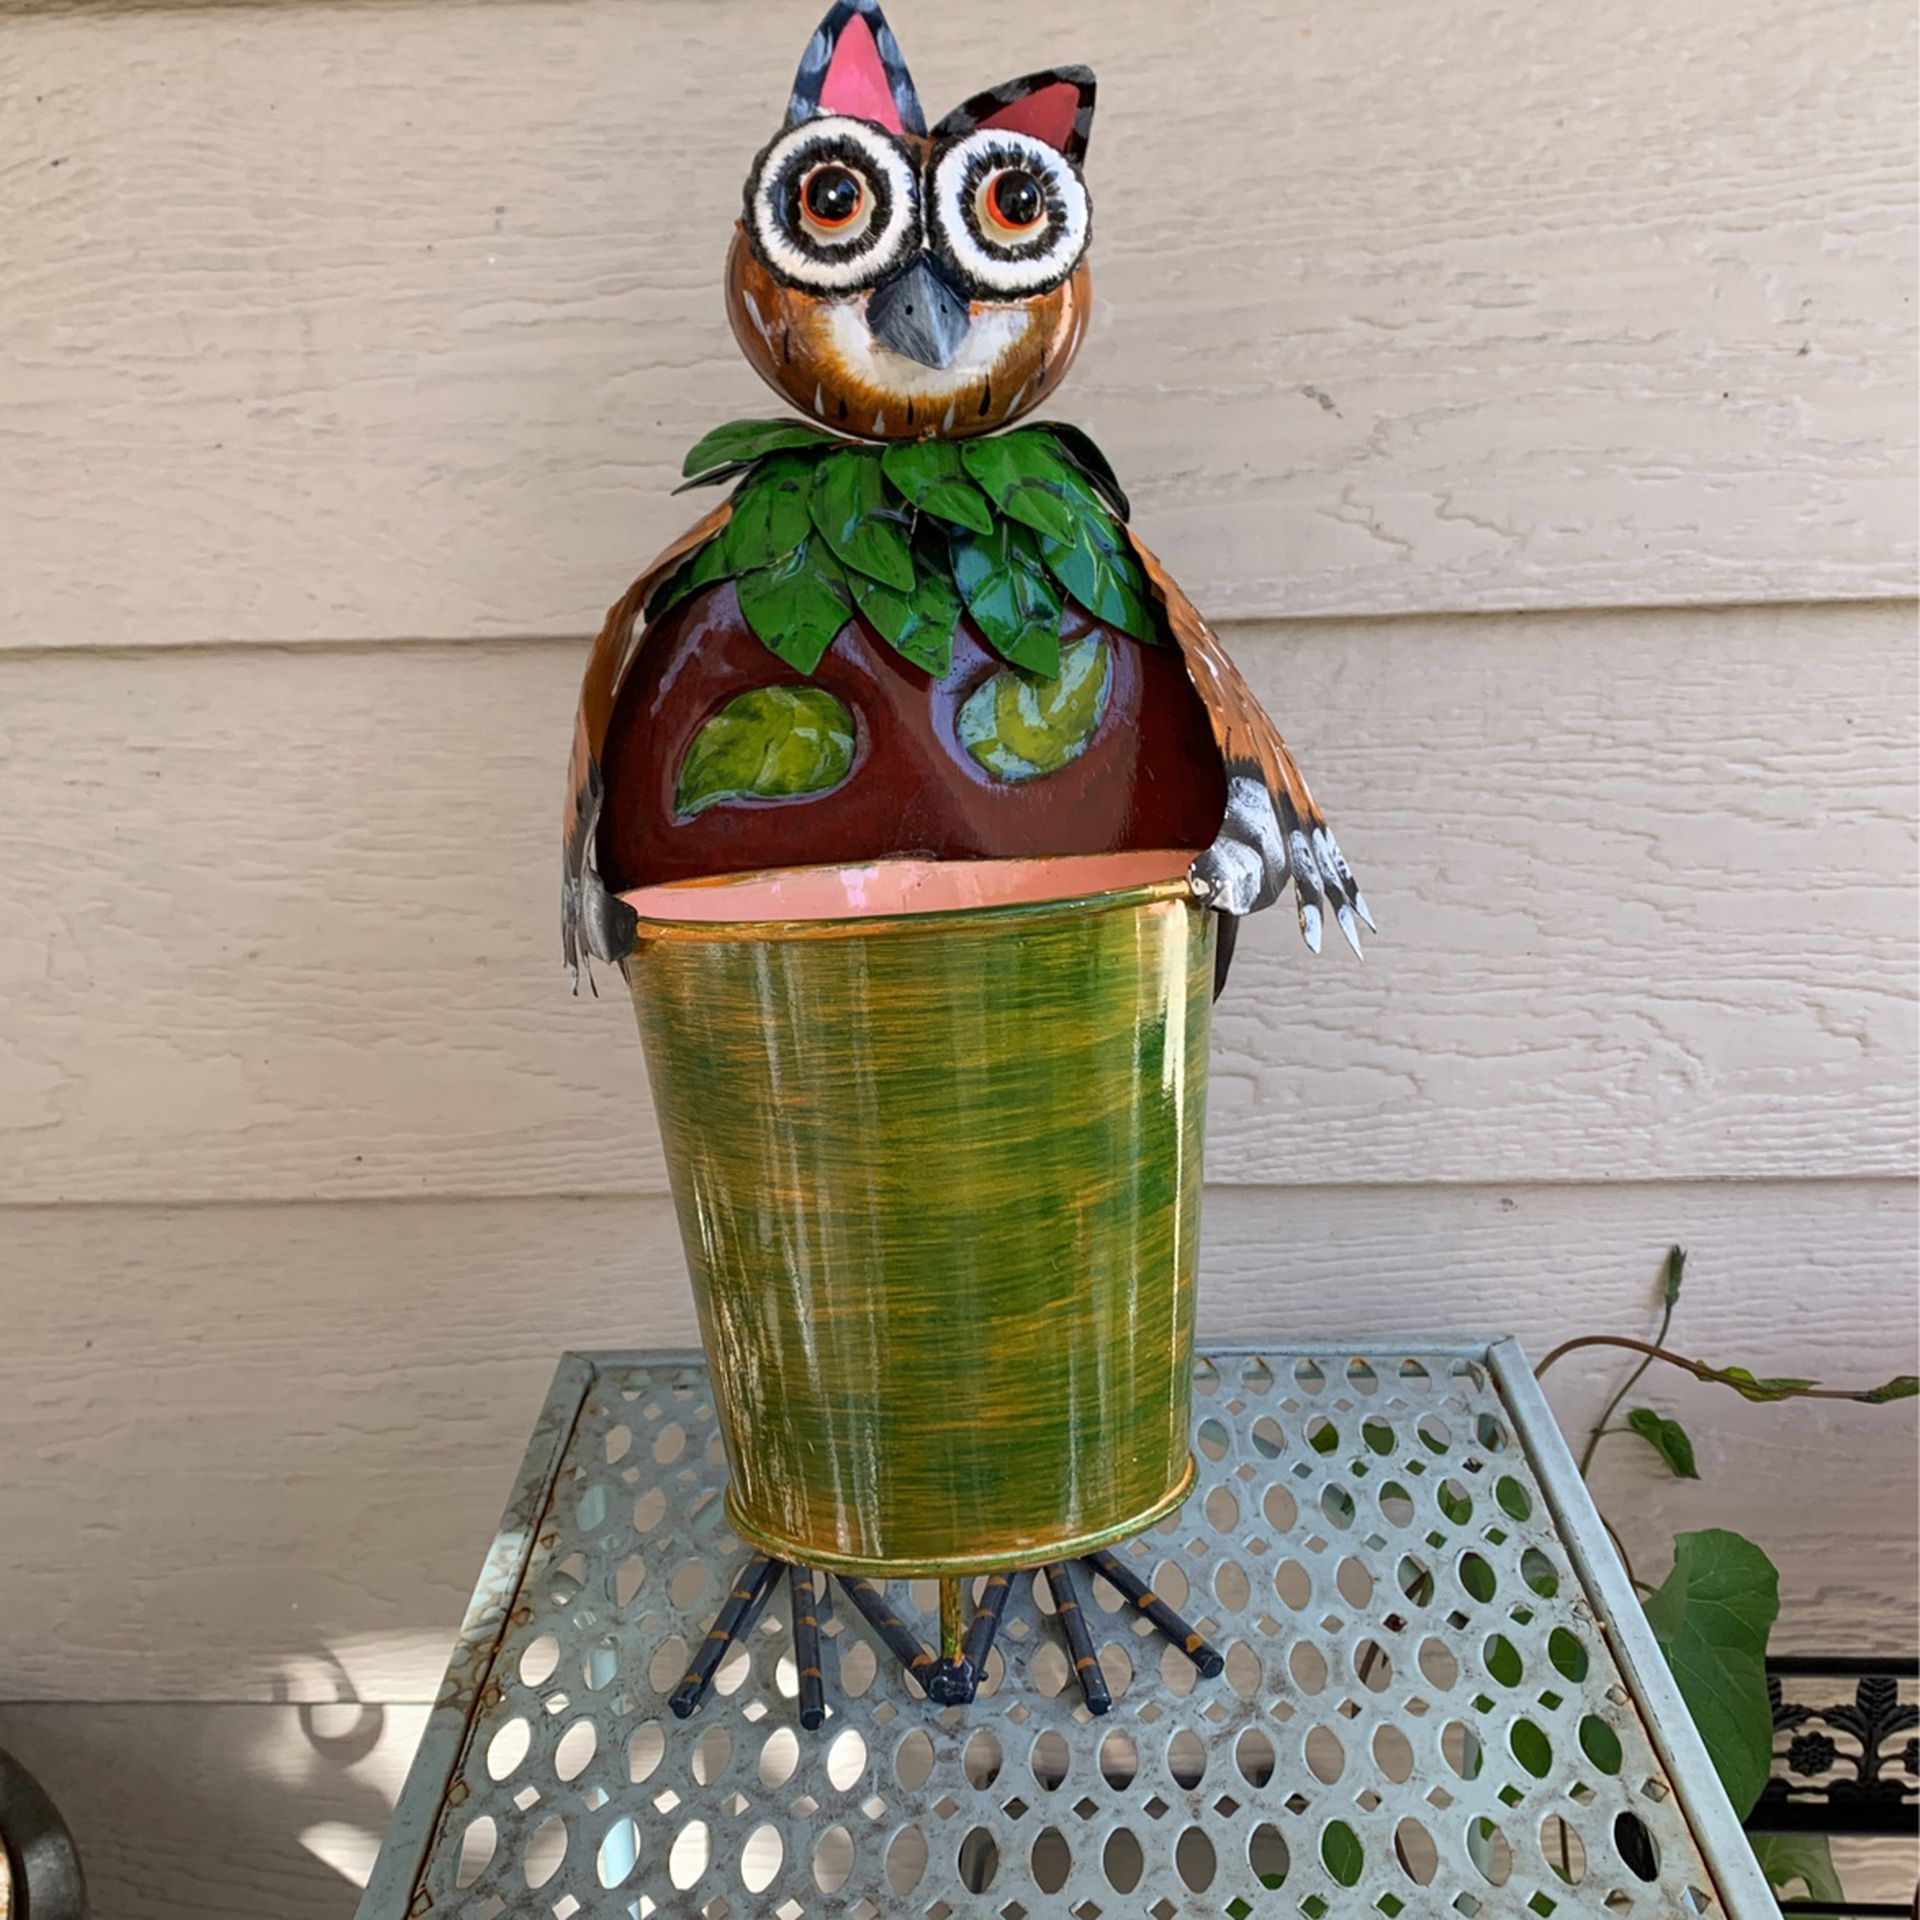 Owl Flower Planter Pot Or Decor- He Has A Broken Ear That Tried To Be Fixed